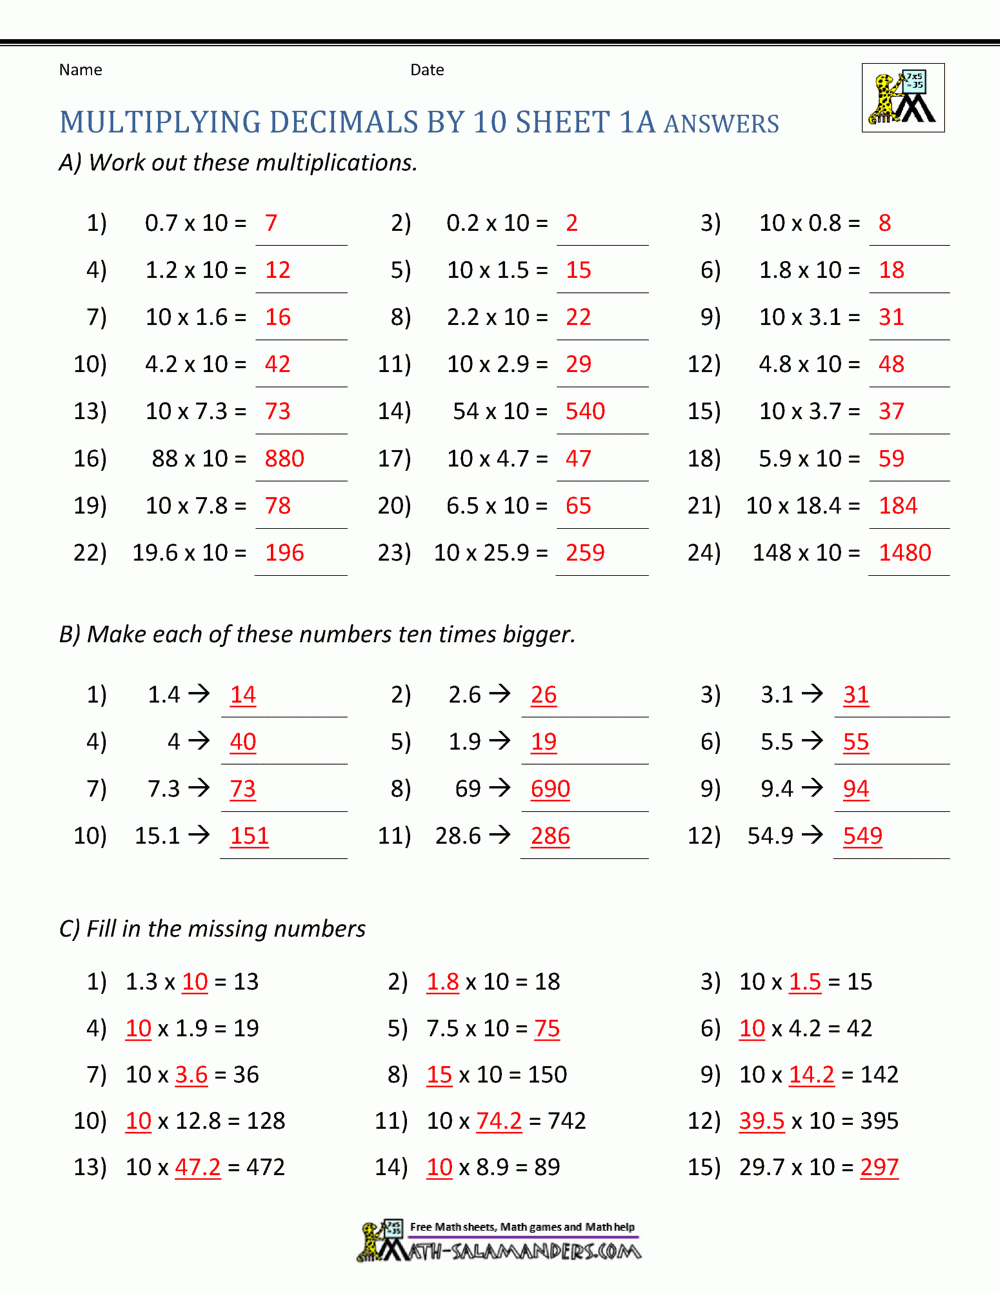 multiplying-decimals-by-10-100-math-worksheet-answers